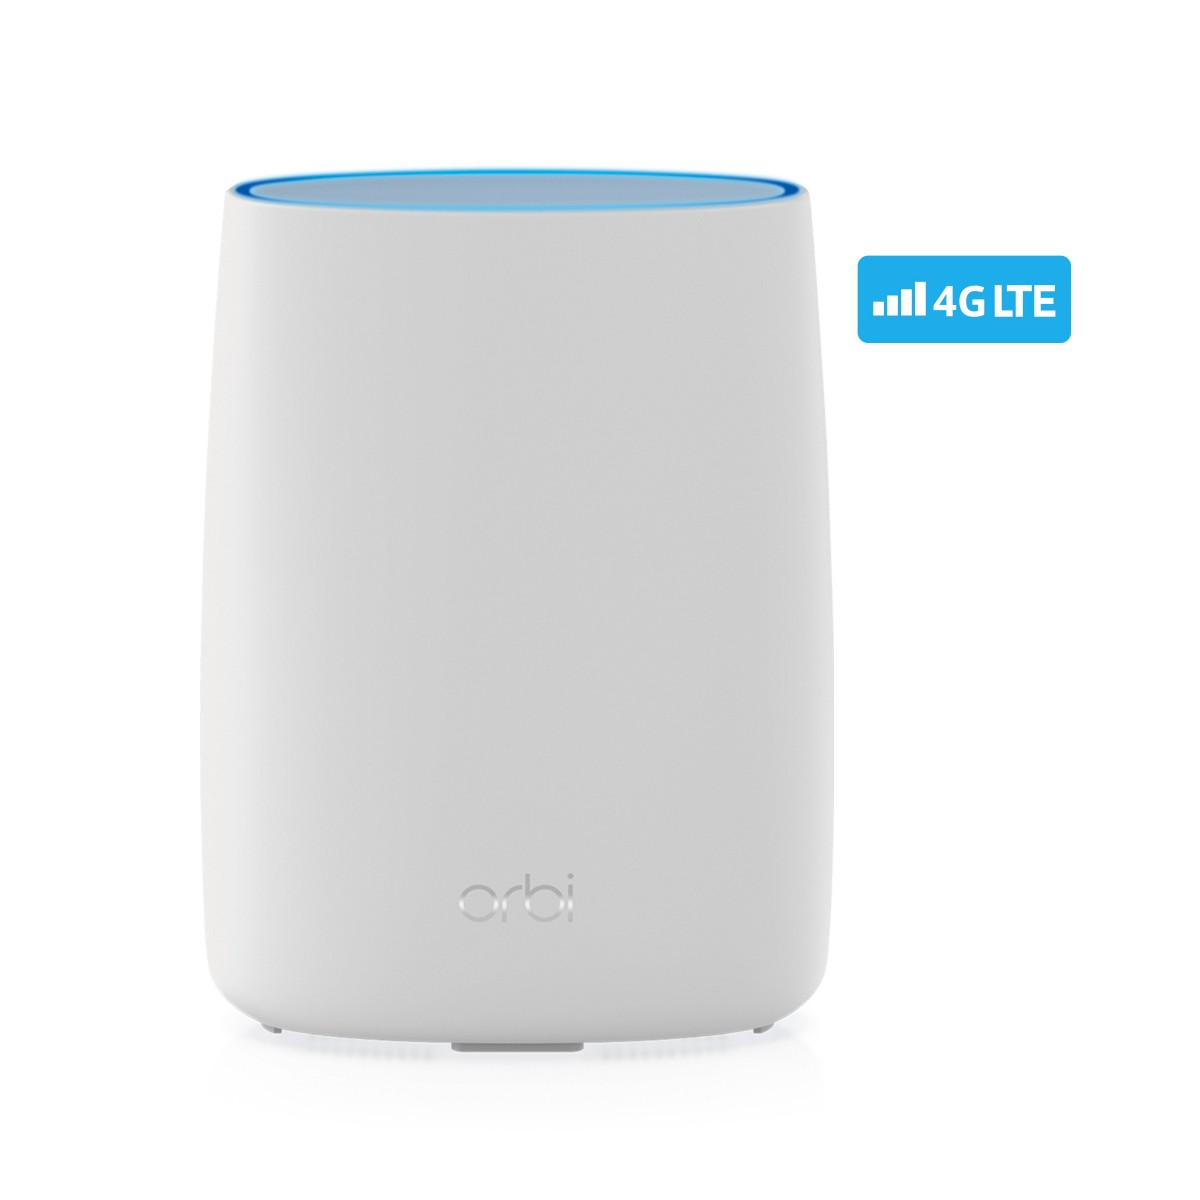 Netgear LBR20 - Wi-Fi 5 (802.11ac) - Dual-band (2.4 GHz / 5 GHz) - Ethernet LAN - 3G - White - Network repeater